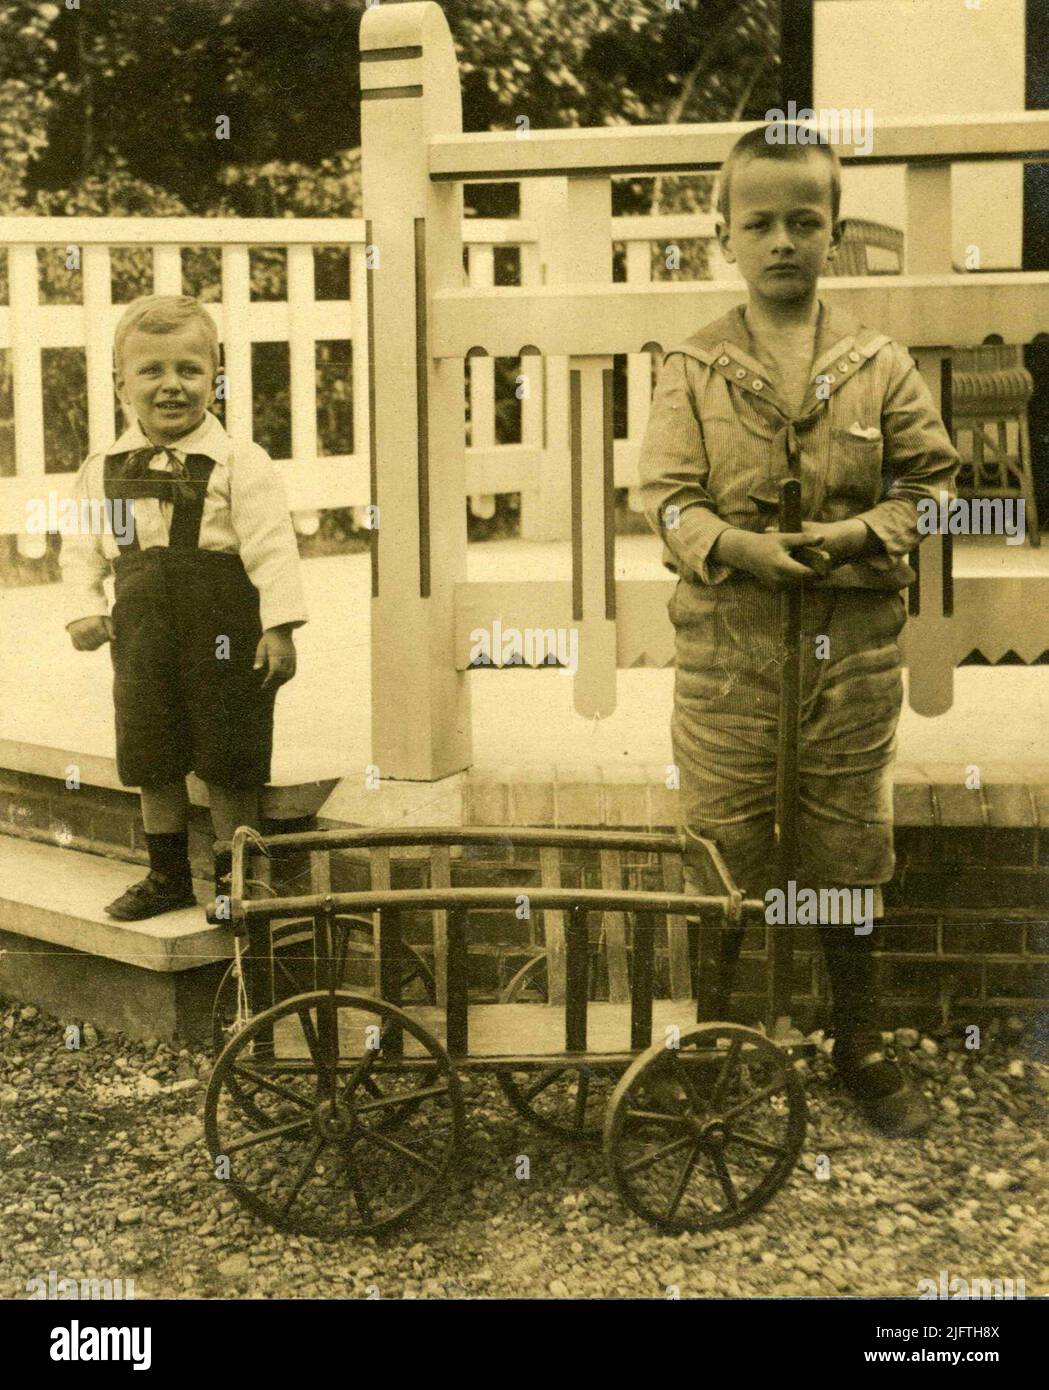 Youth photo of Wilhelmus Johannes Frans (Wim) Meiners (06/08/1908) and brother Johannes Leonardus Jacobus (Hans) (23/07/1913 - 08/07/1999), children of Johann Friedrich Meiners (15/01/1874 - 30/05/1956) and wife Hermance Hendrica Hello (24/11/1877 - 21/12/1968). Hermance is the sister of timber trader Jacobus Winus Johannes (Cobus) Hello (01/06/1880 - 01/01/1934), husband of Johanna Christina van Houweninge (11/12/1891 - 21/07/1974), youngest daughter of Joachimus (Chiem) van Houwinge (24/03/1859 - 22/02/1936), coal trader, large landowner of the area on and adjacent to the Kwakkenberg and fou Stock Photo